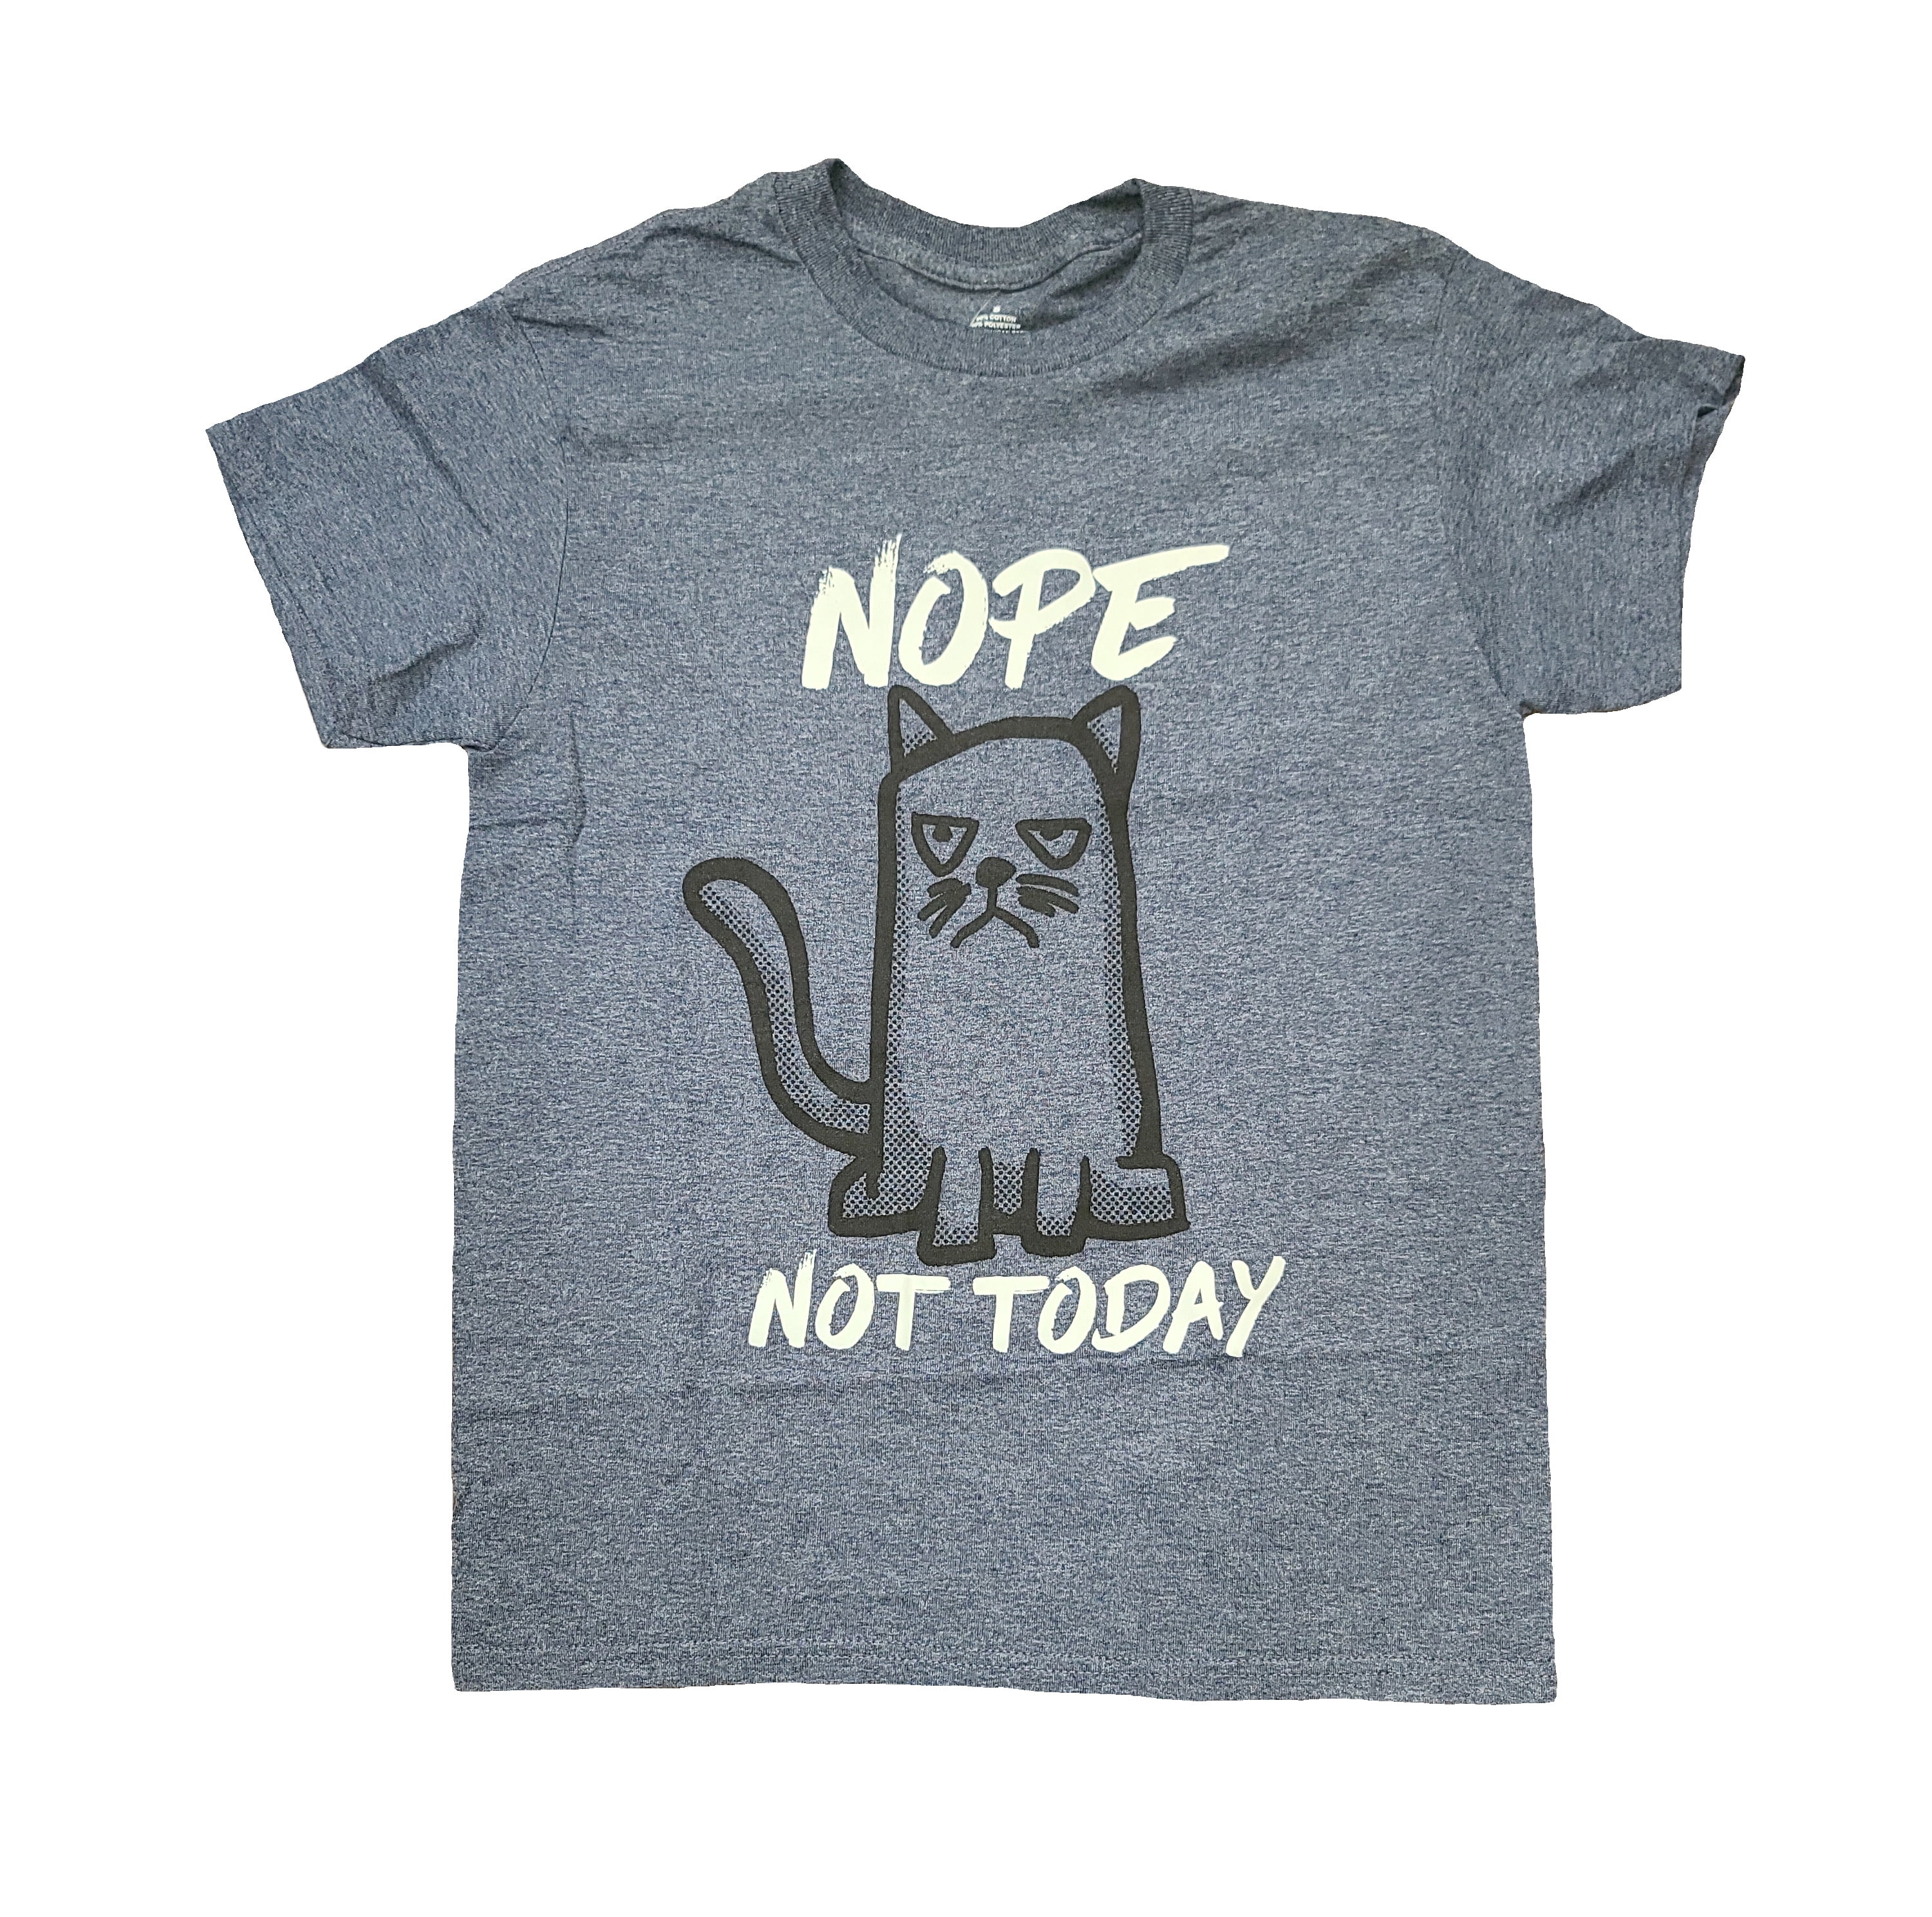 2XL - Today Nope Not Blue T-Shirt Graphic Kitty Cat